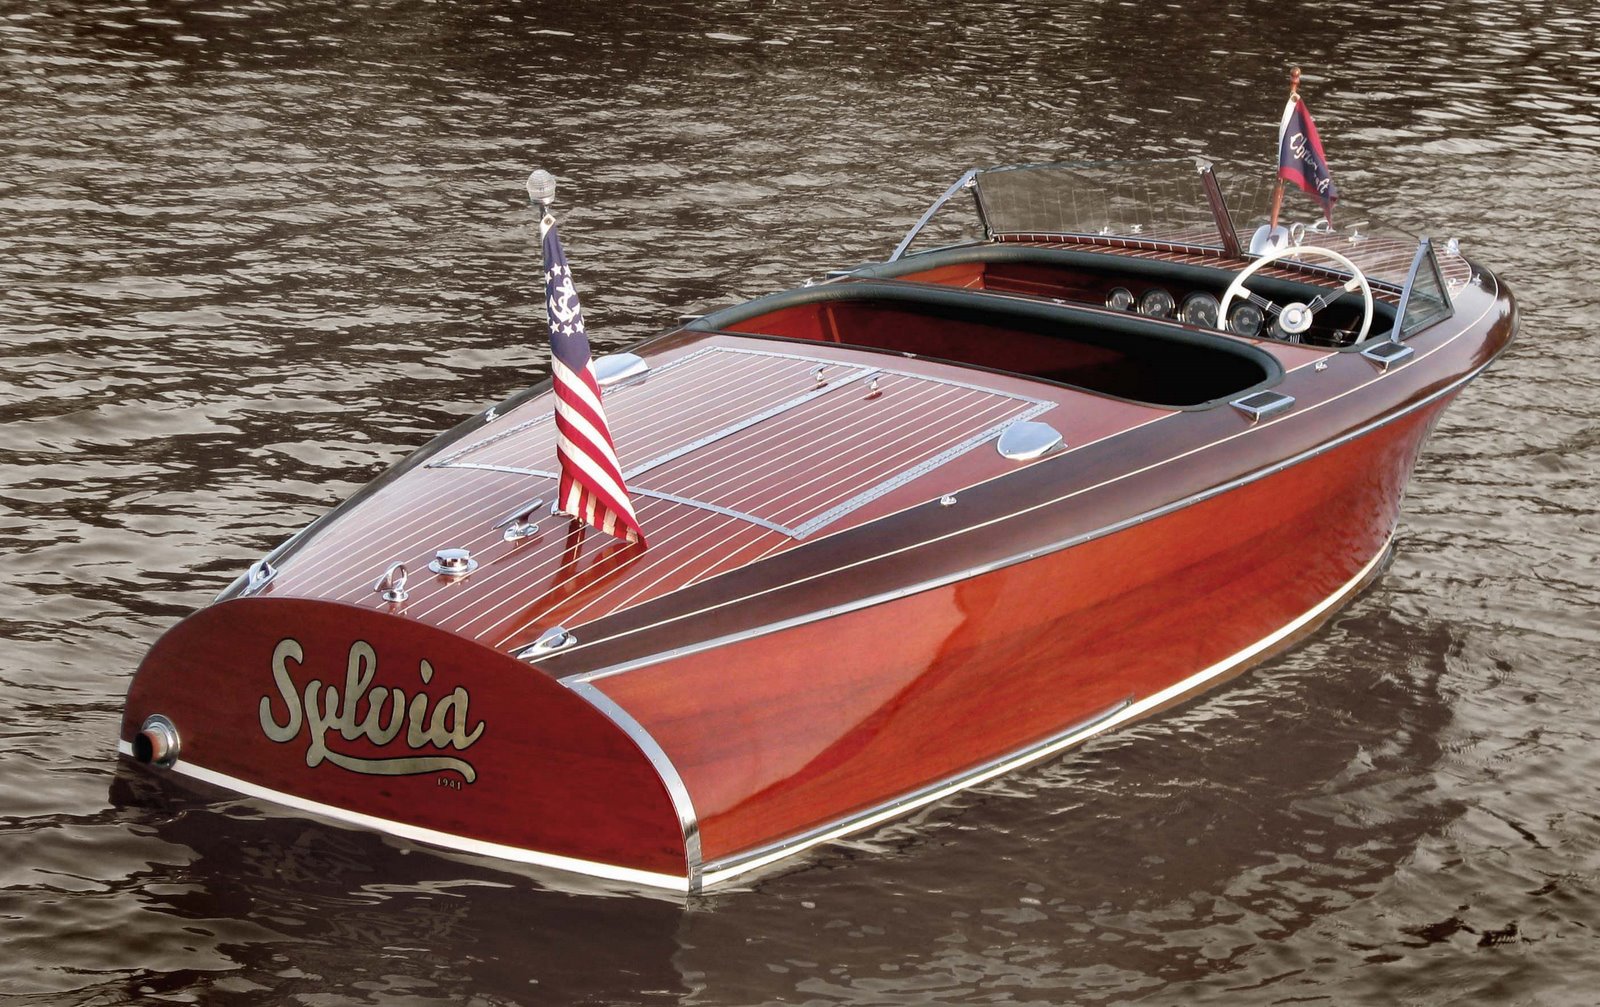 Lake James Antique Boat and Car Show is Saturday